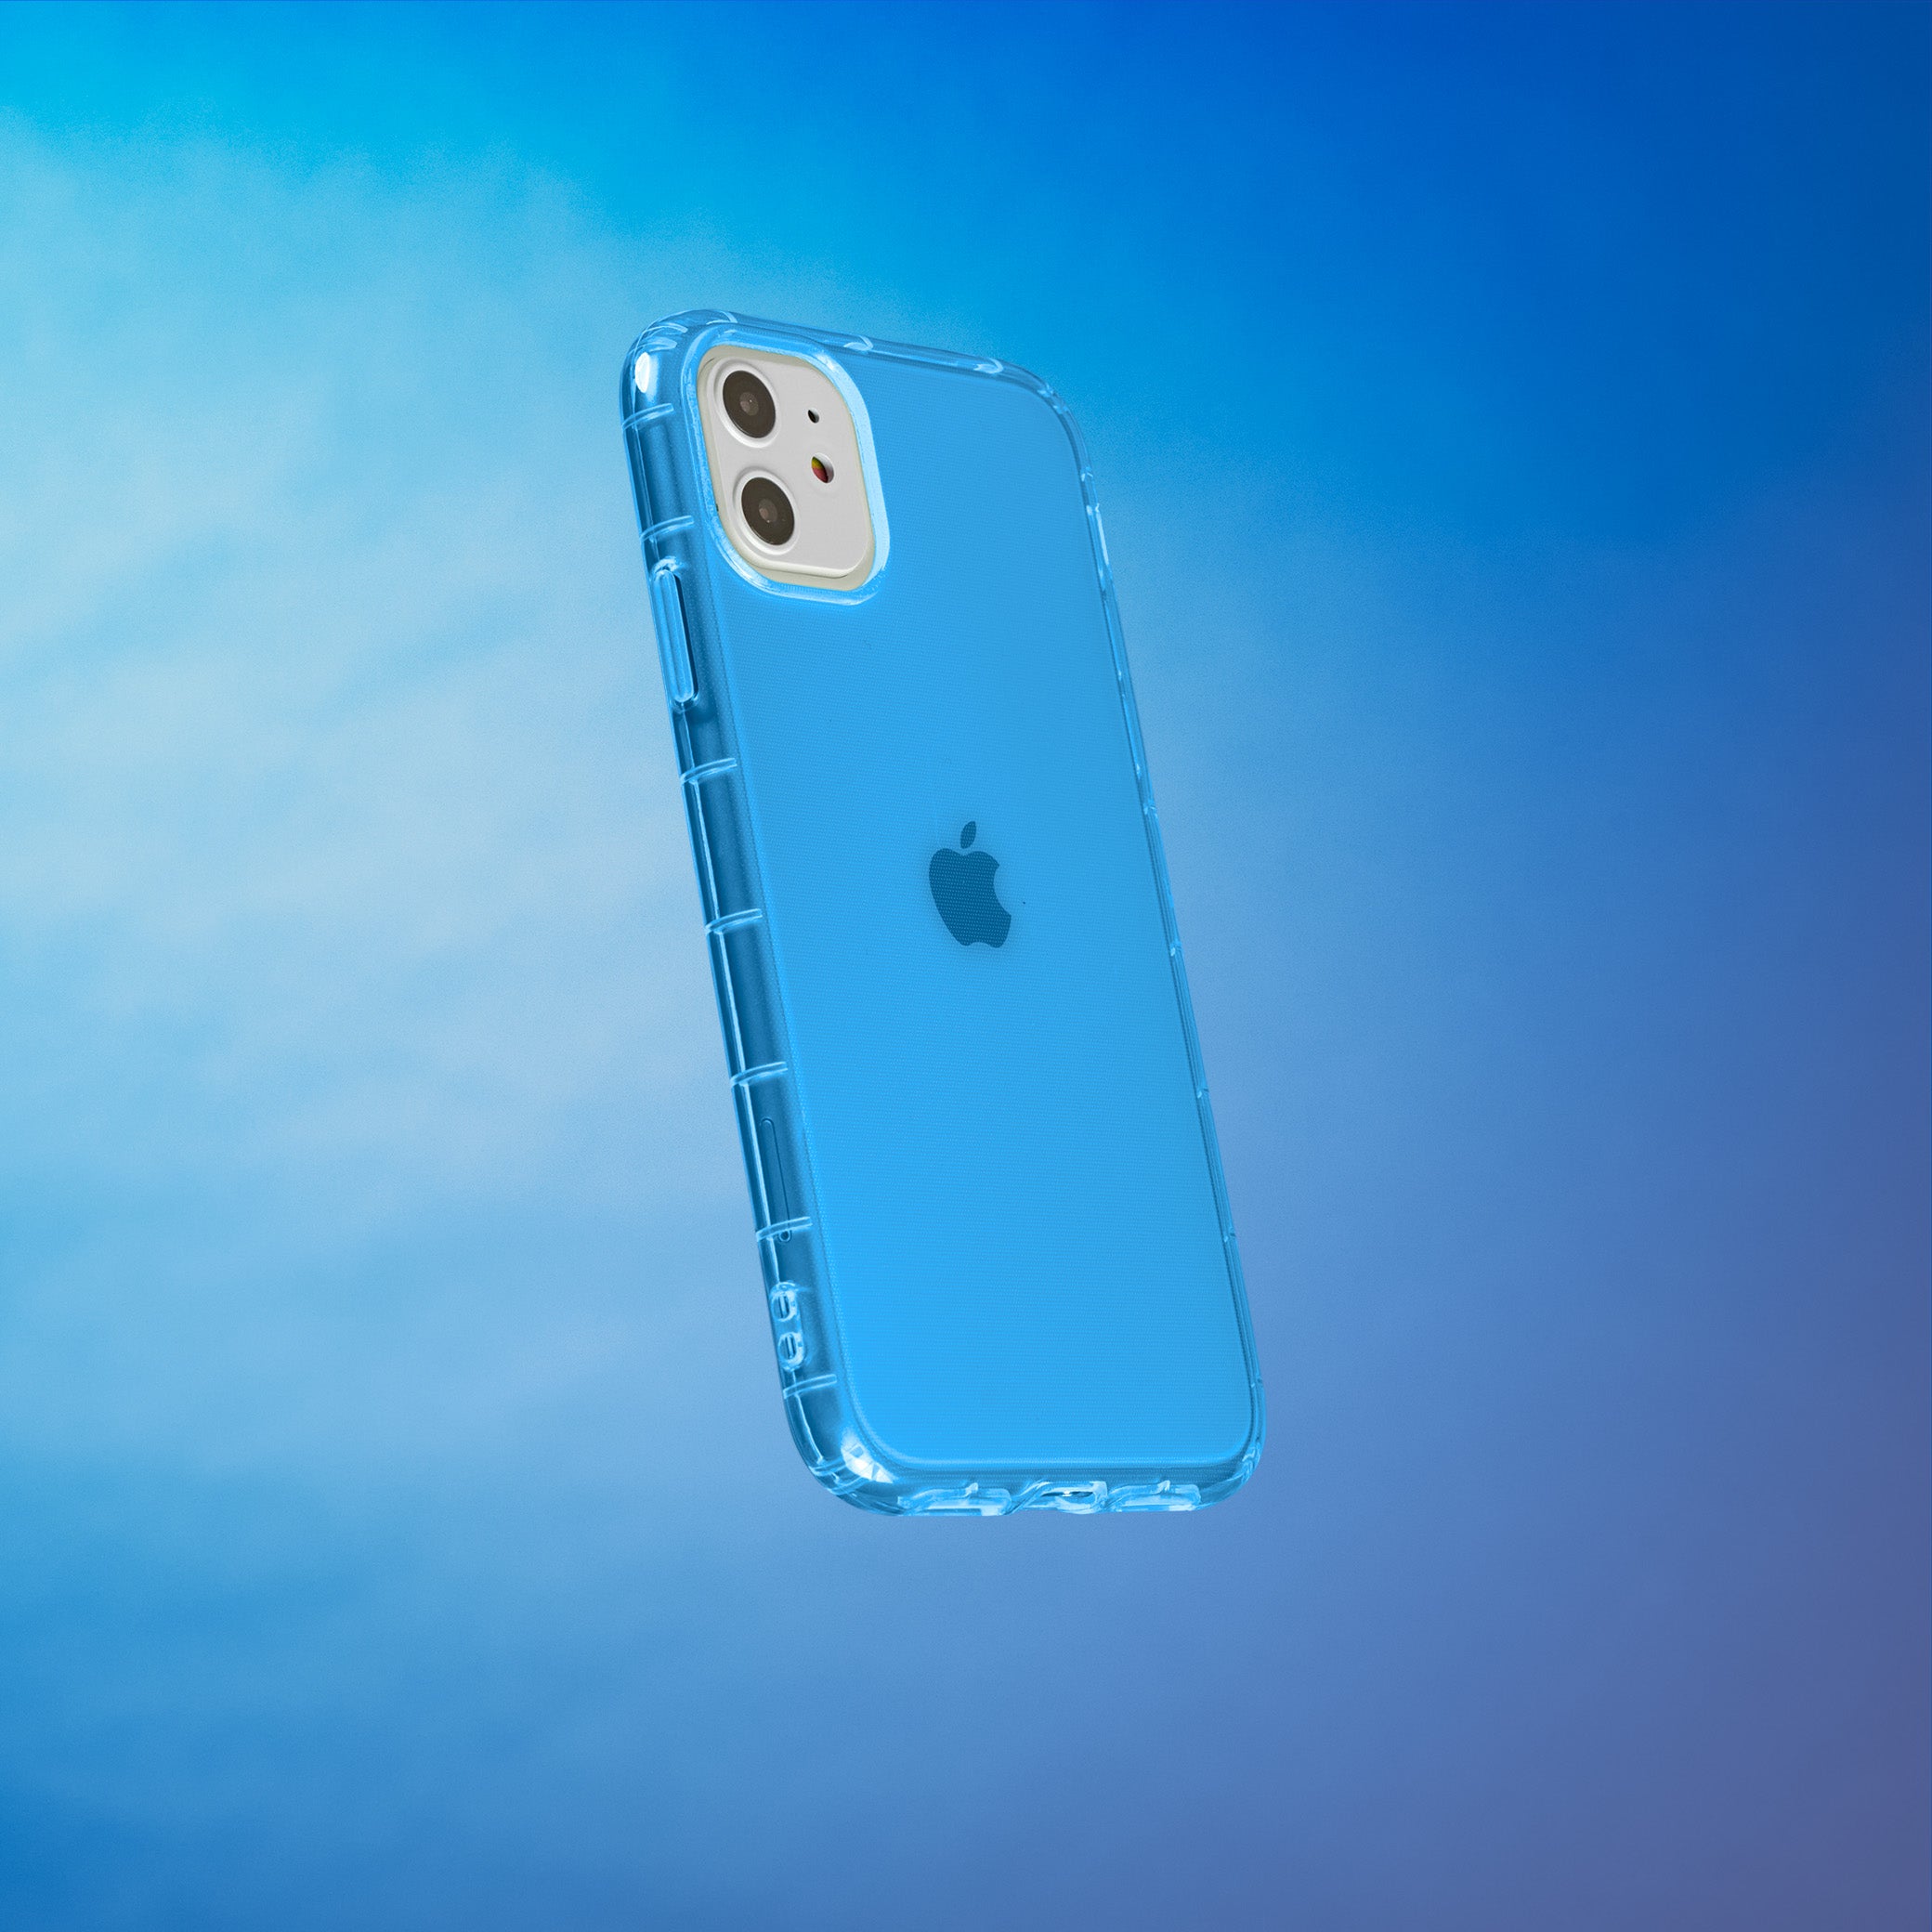 Highlighter Case for iPhone 11 - Elevated Azure Blue